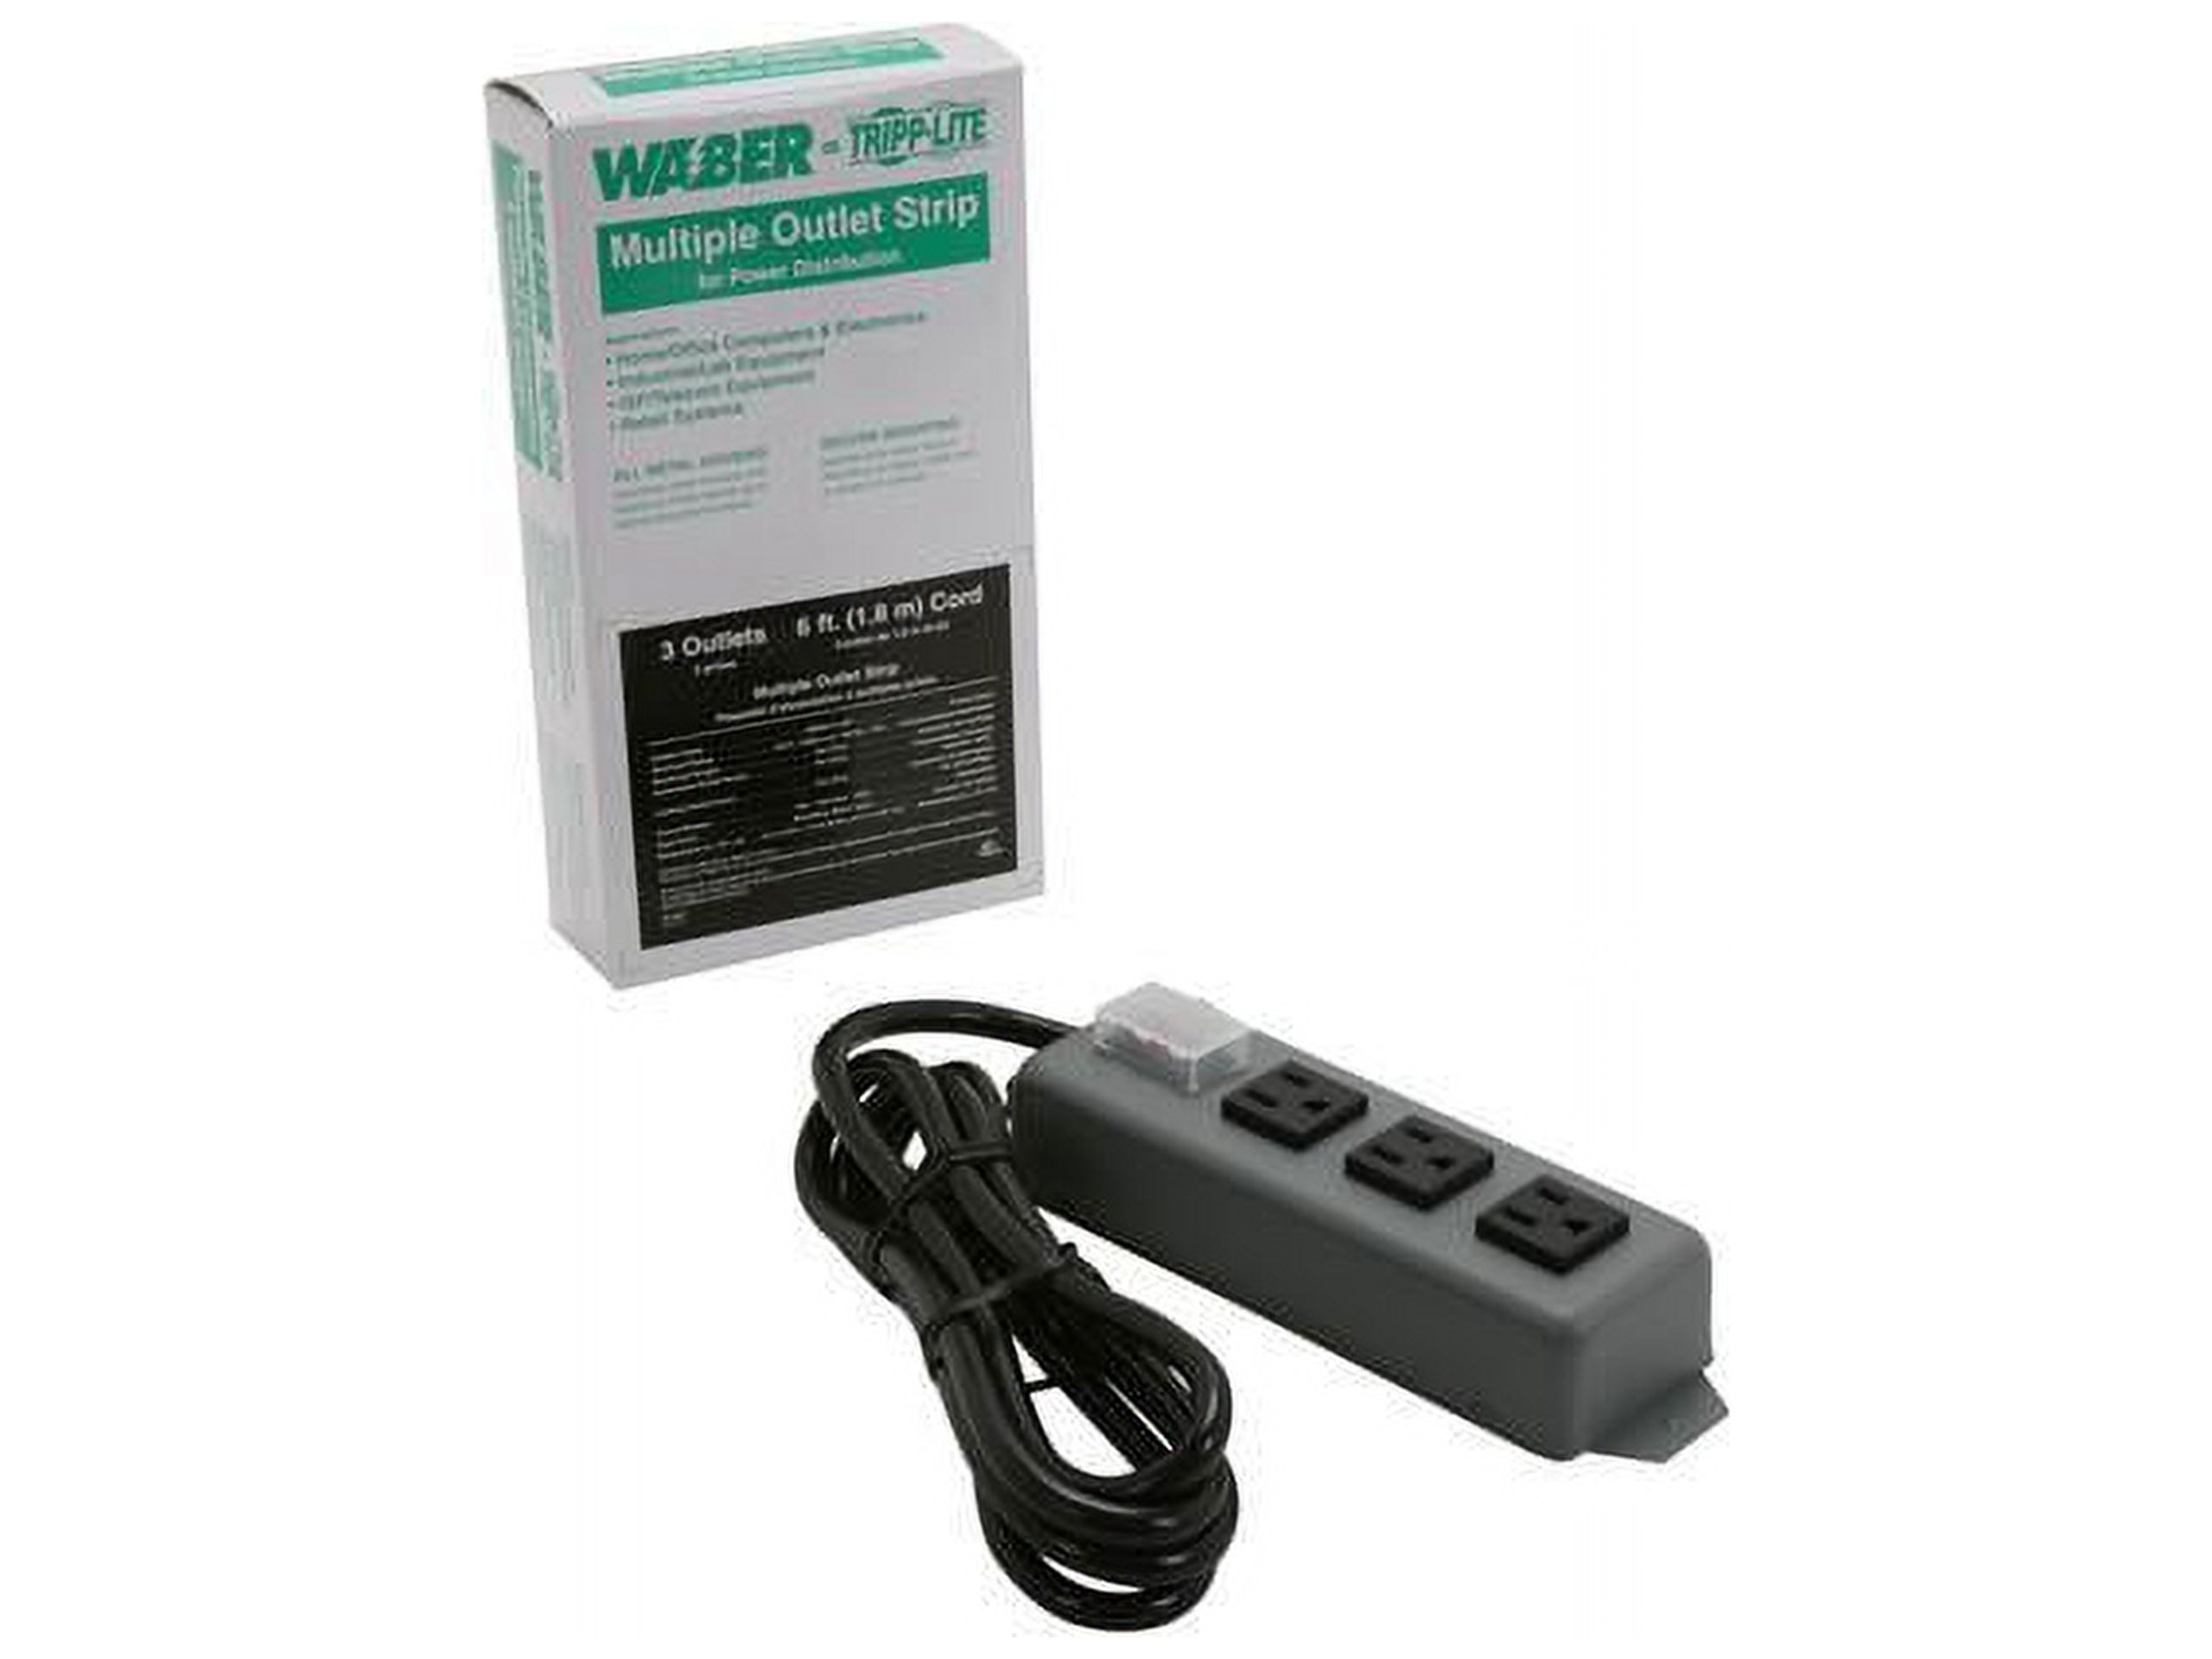 Tripp Lite 3SP Waber by Tripp Lite 3-Outlet Industrial Power Strip, 6-Foot Cord - image 4 of 4